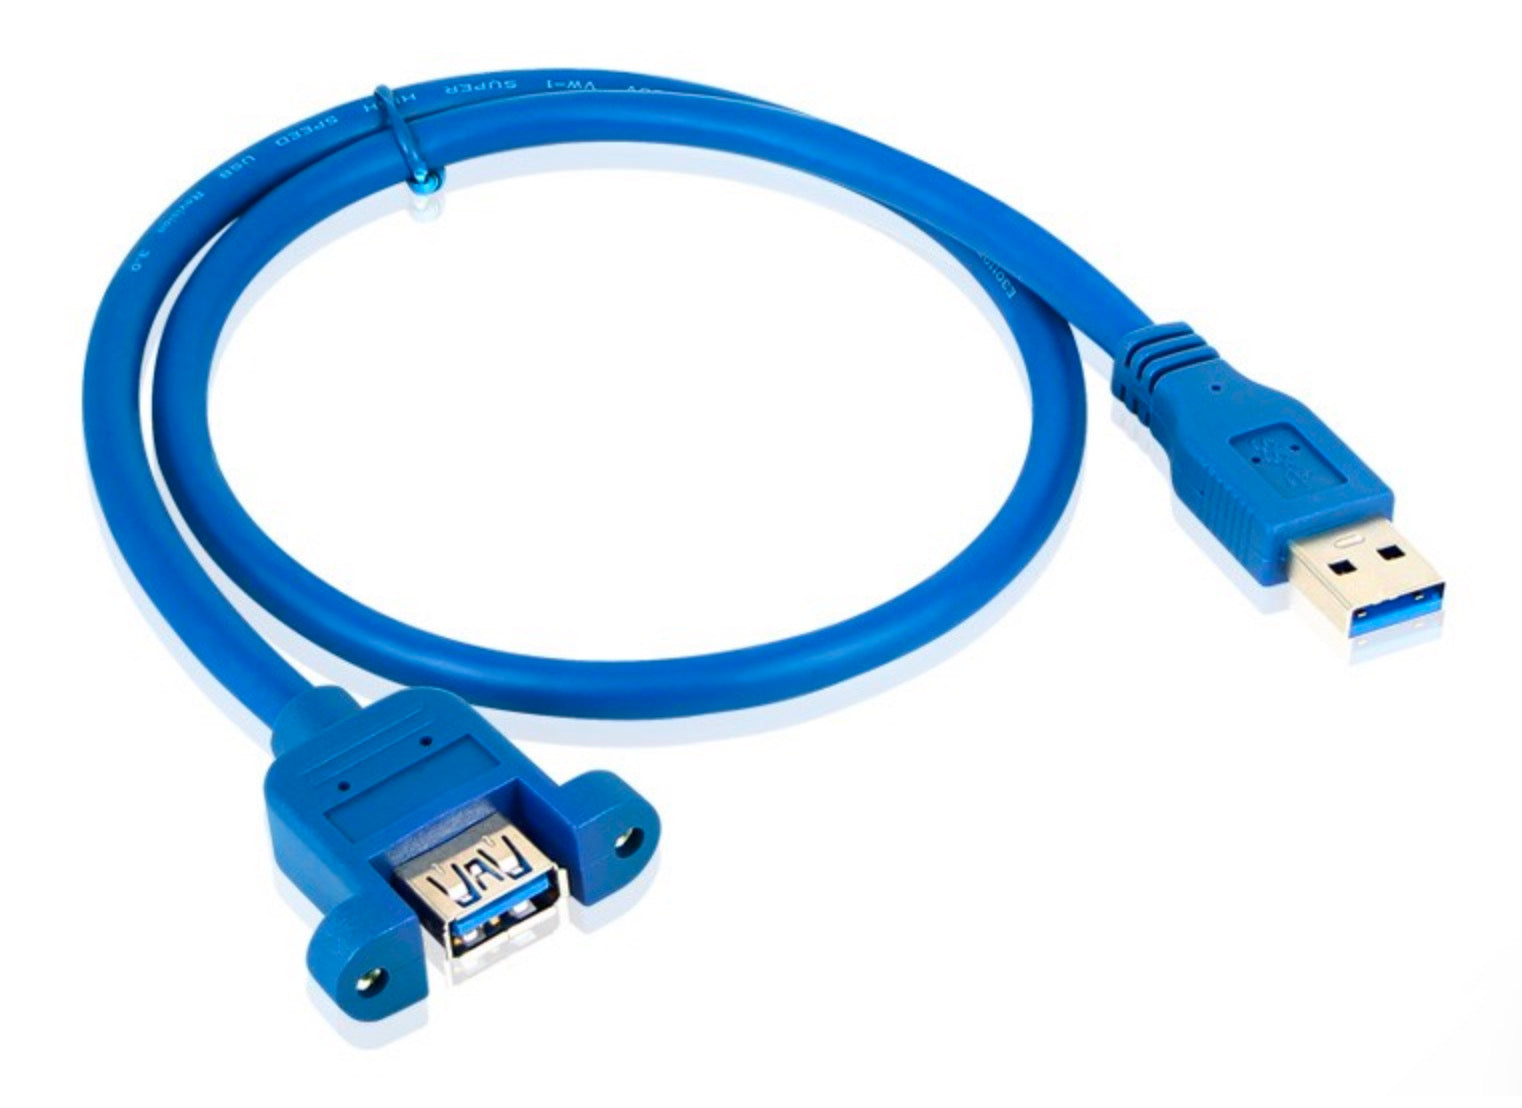 USB 3.0 A Male to Female Panel Mount Cable